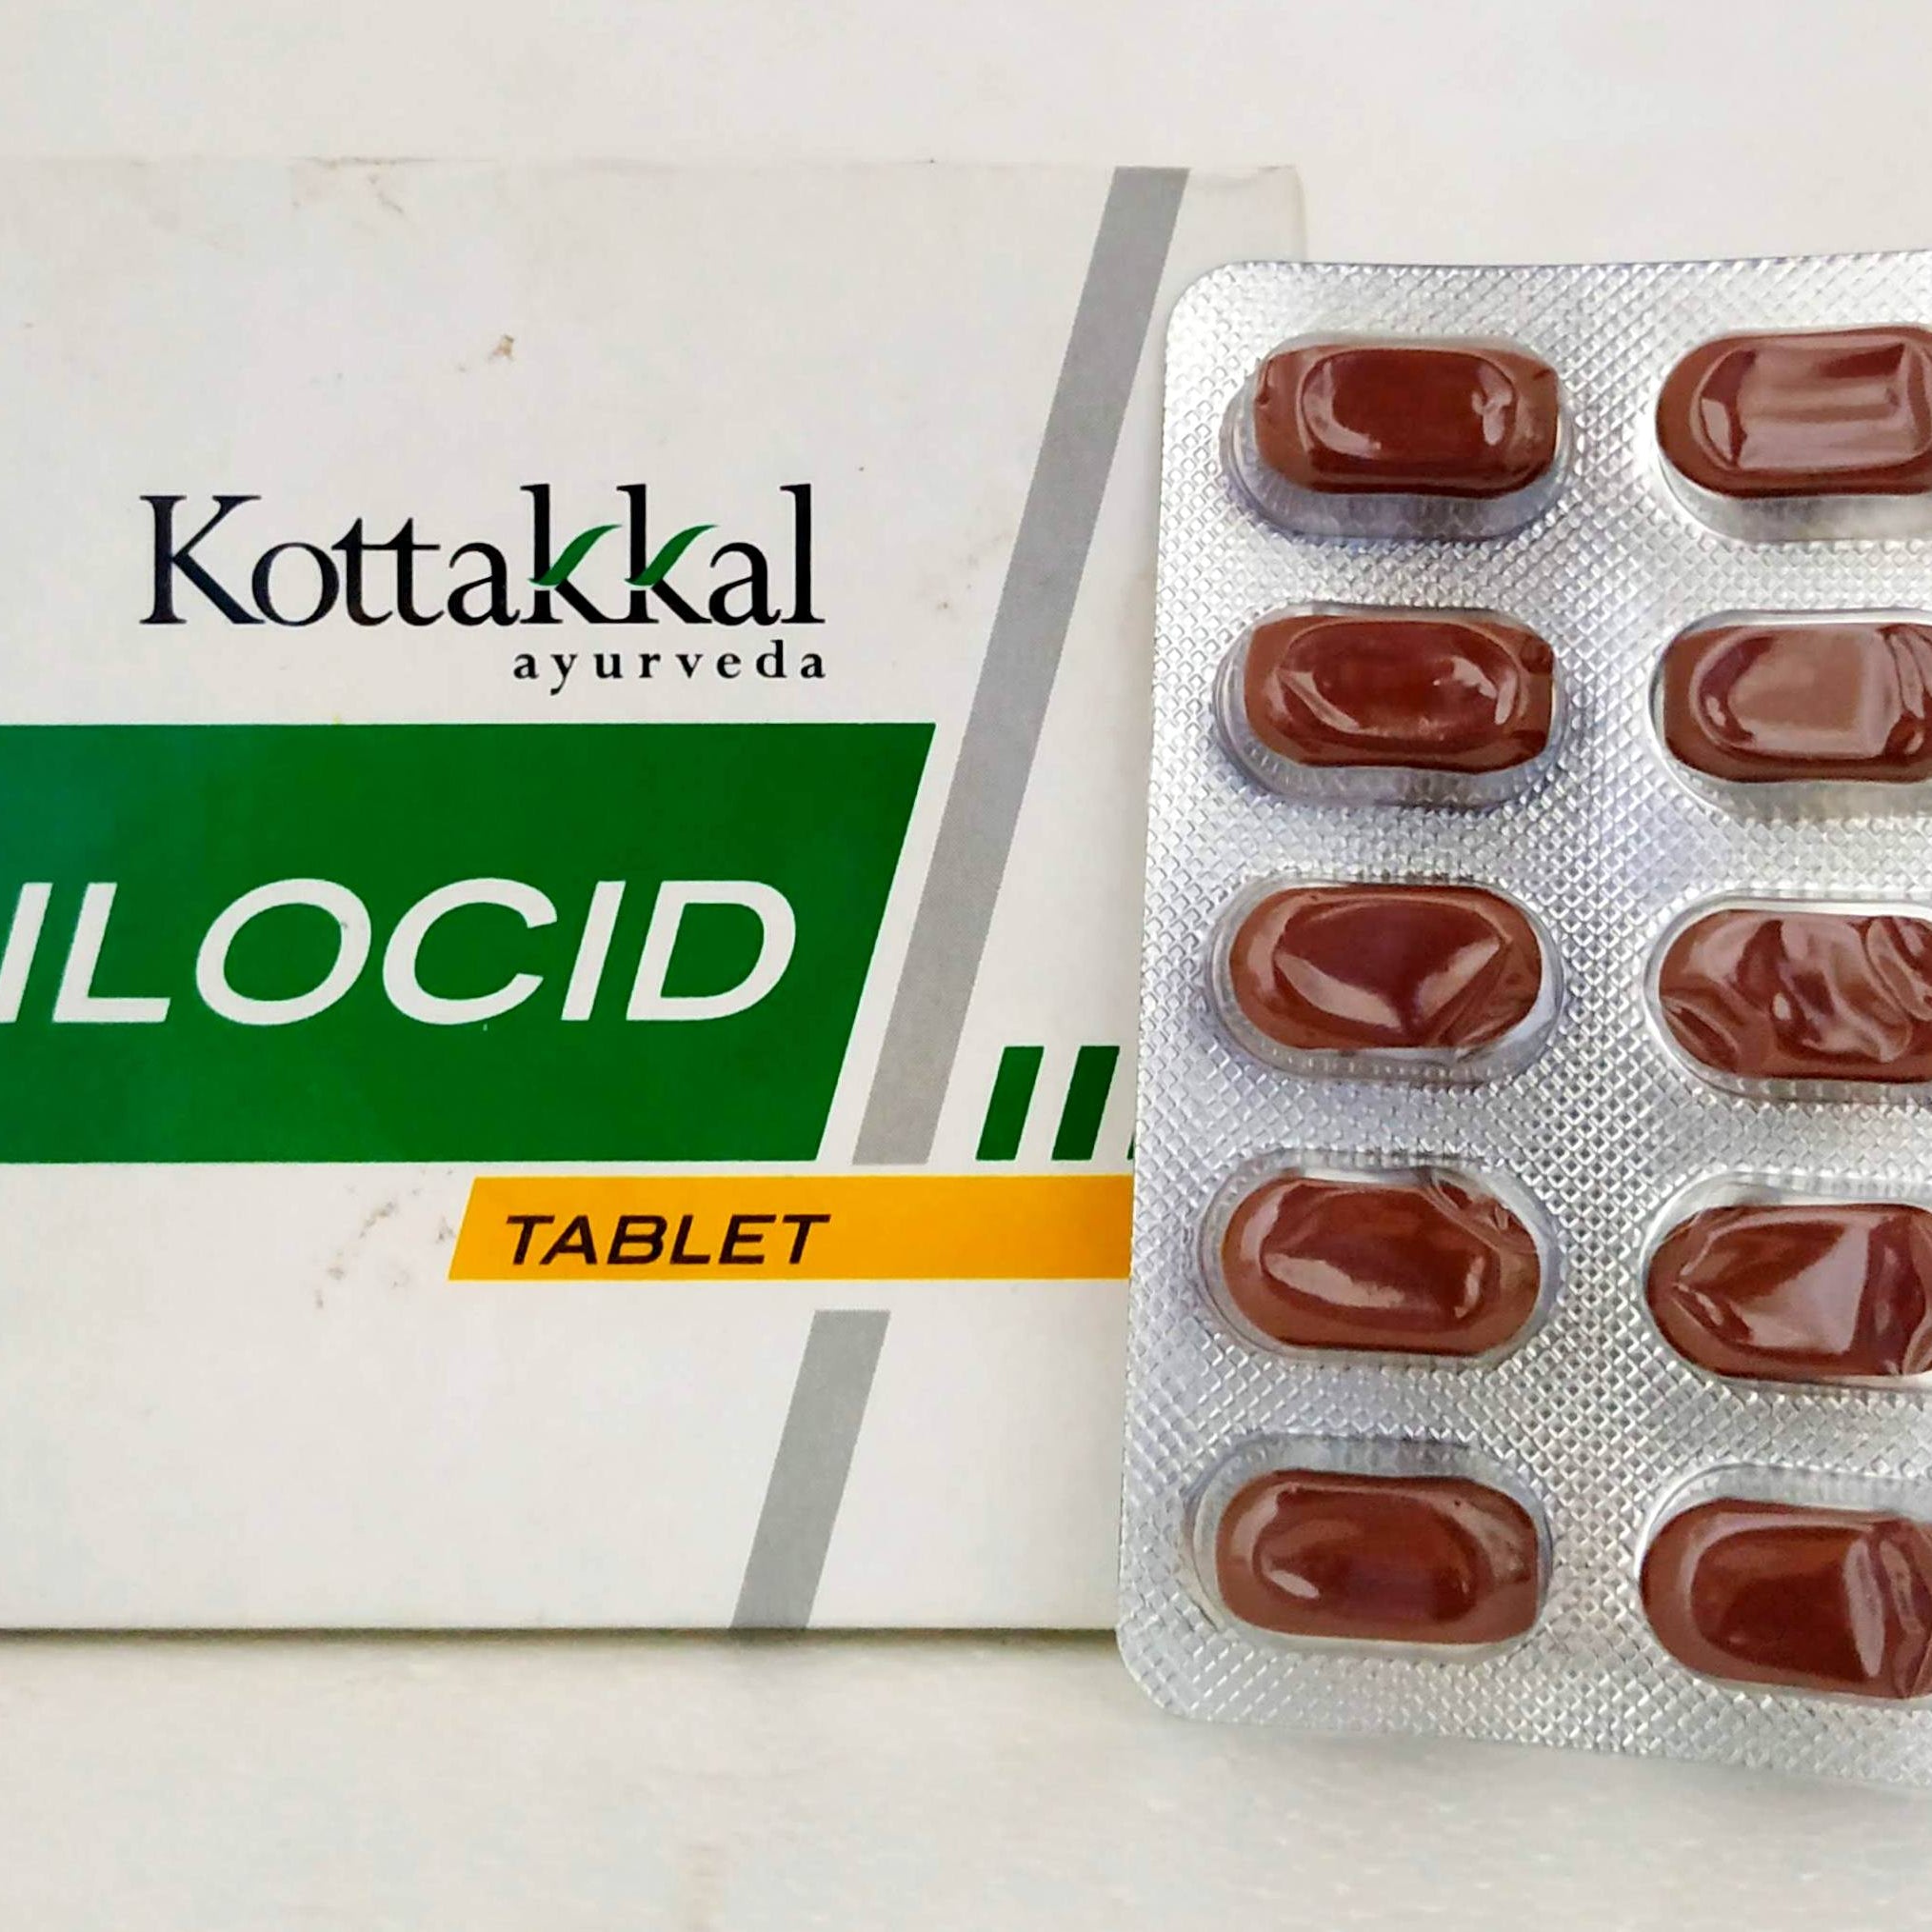 Shop Pilocid Tablets - 10Tablets at price 45.00 from Kottakkal Online - Ayush Care